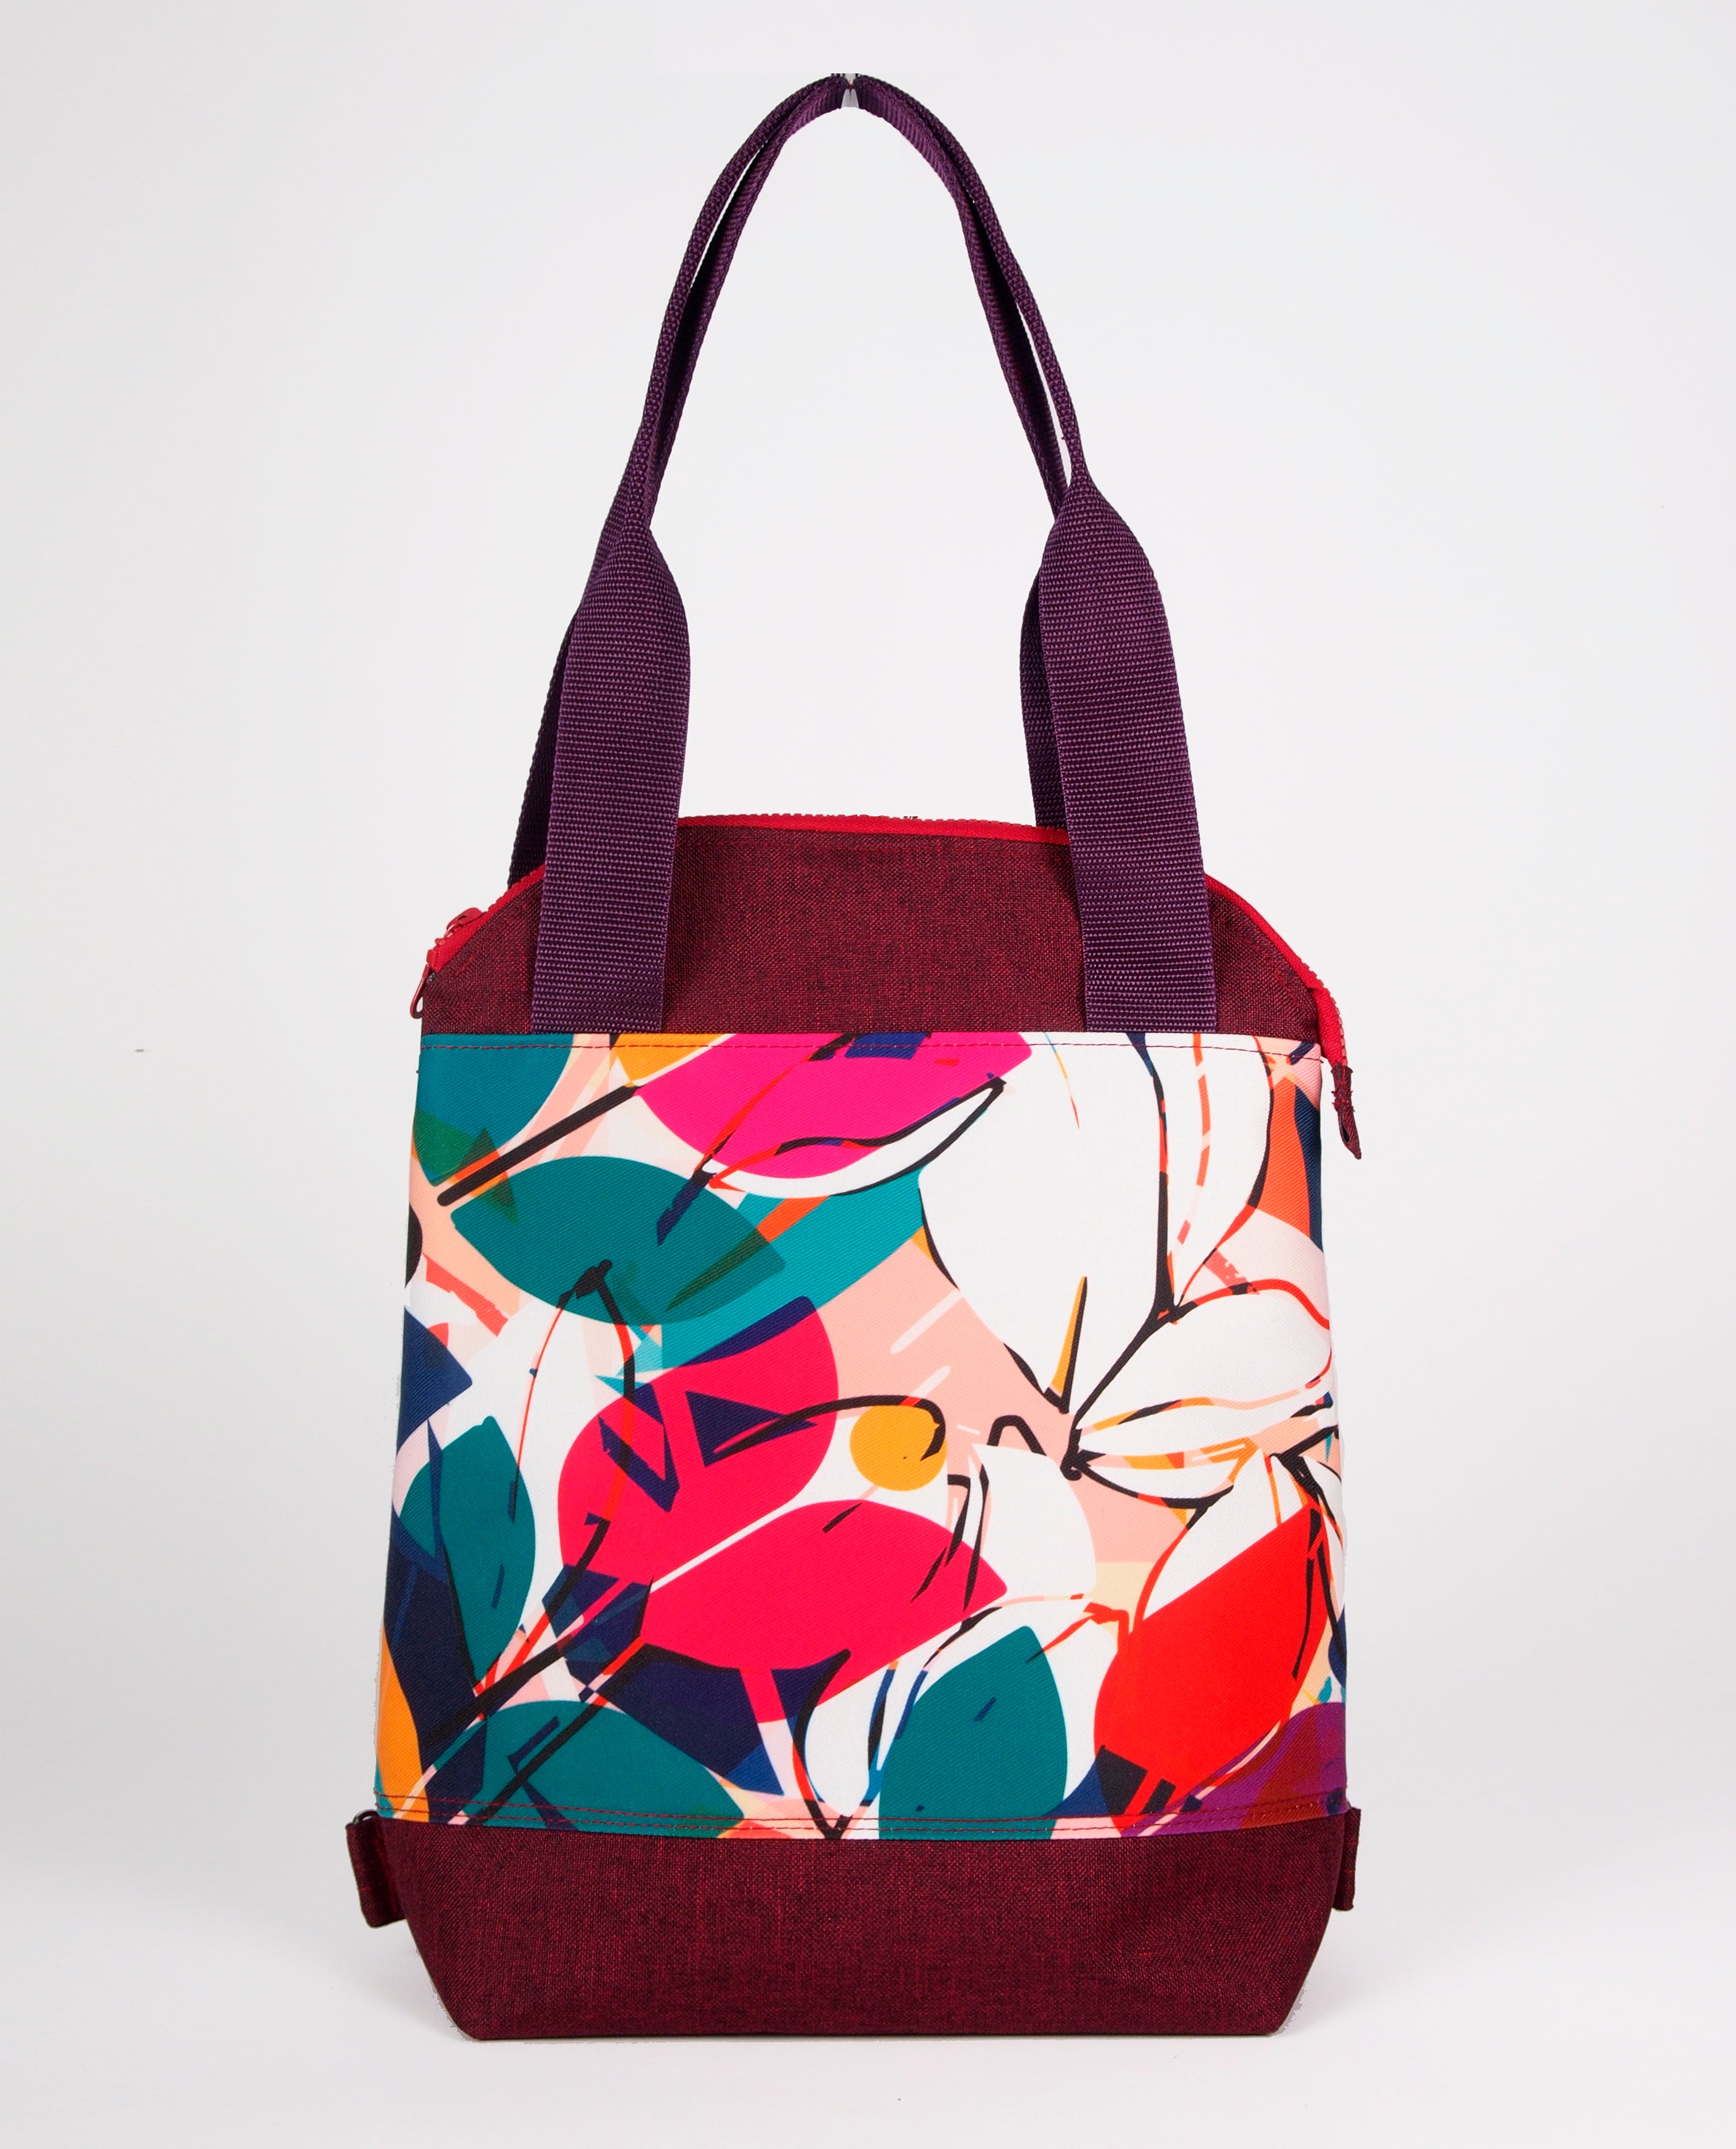 Bardo classic backpack textiles -  Queen of Flowers - Premium Textiles from BARDO ART WORKS - Just lvabstract, black, floral, handemade, leaves, tablet, urban style, woman, work bag89.00! Shop now at BARDO ART WORKS